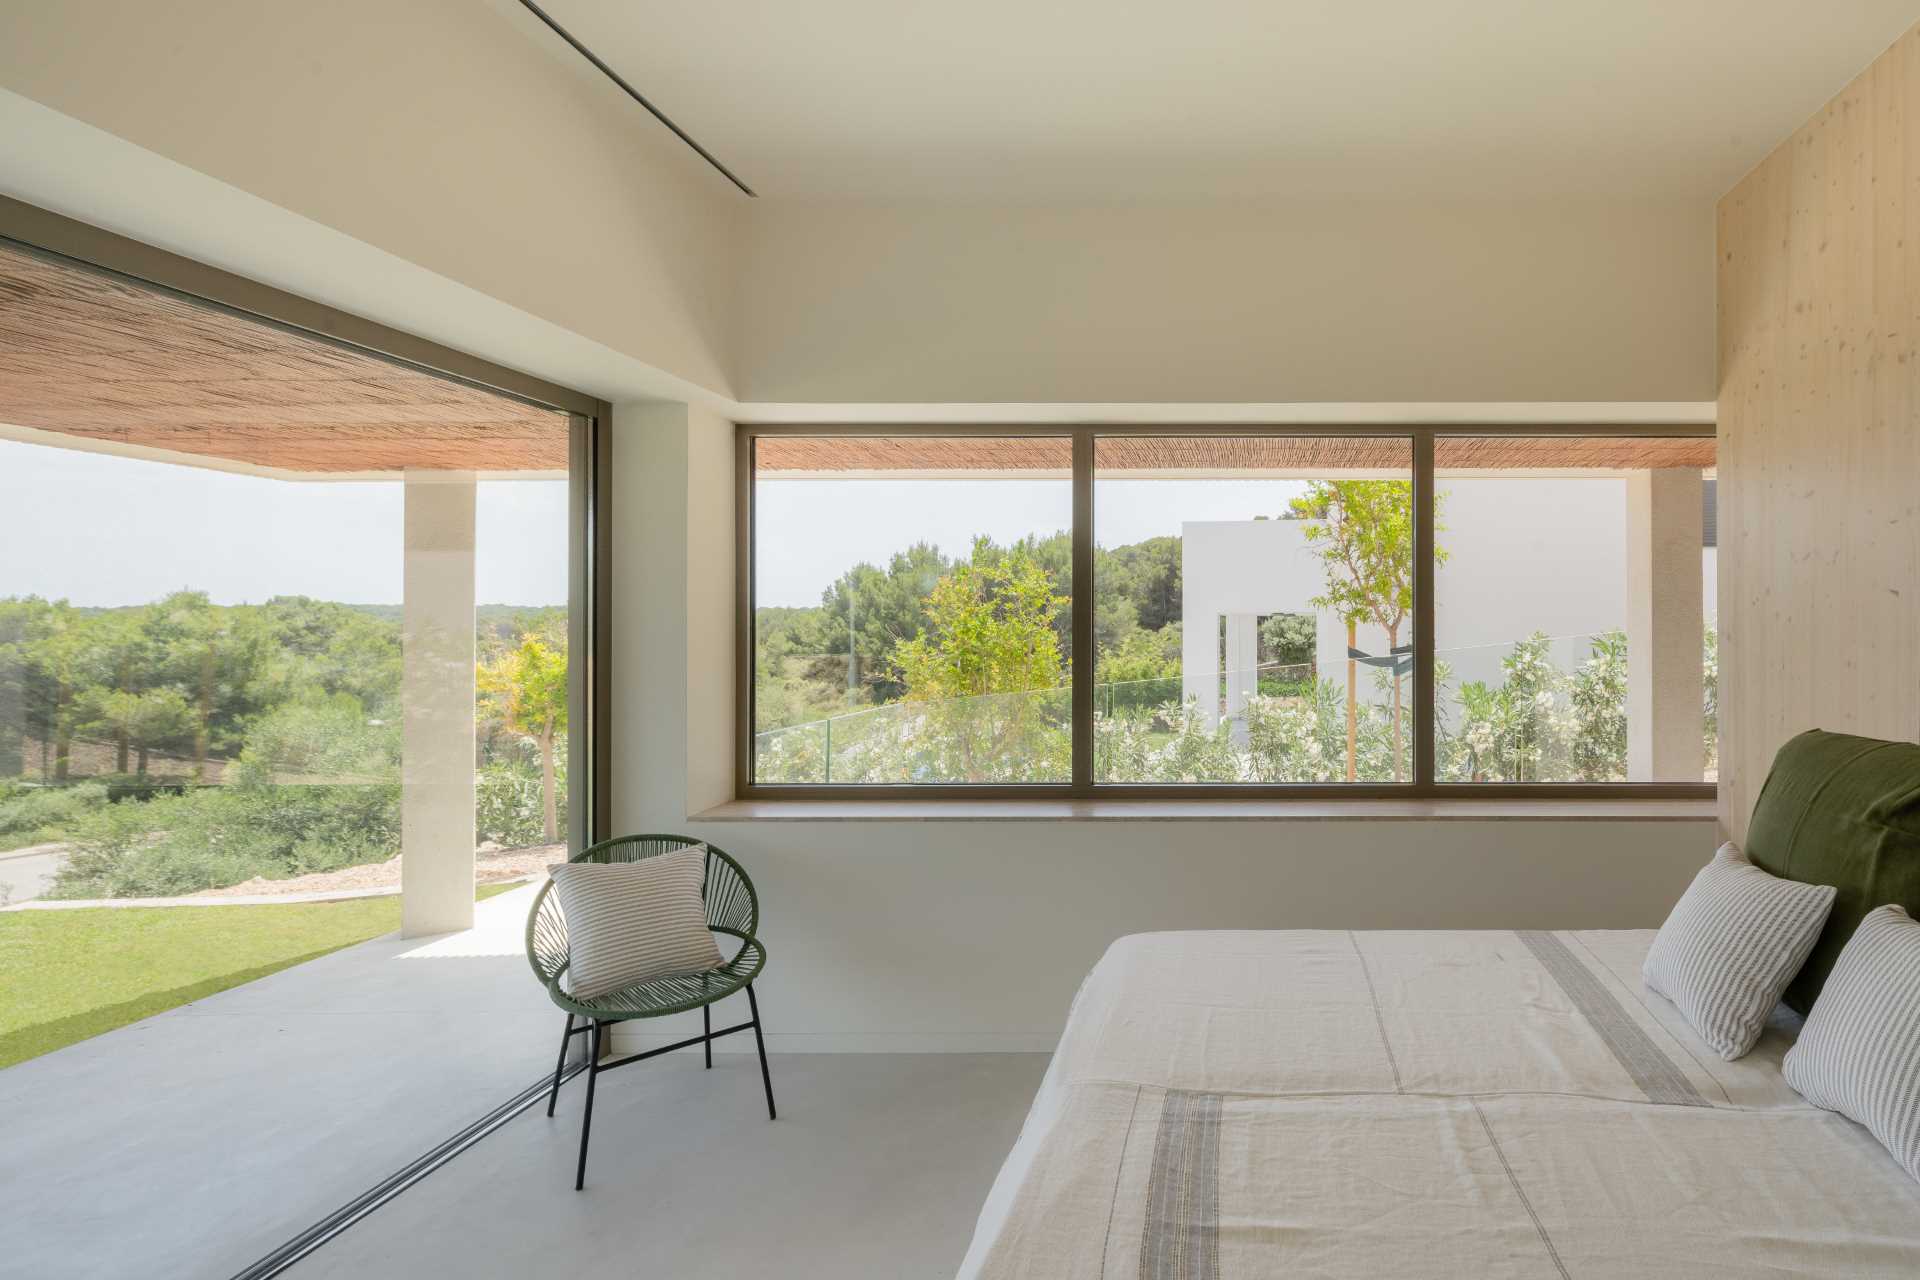 A modern bedroom with a sliding door that opens to a shaded terrace.